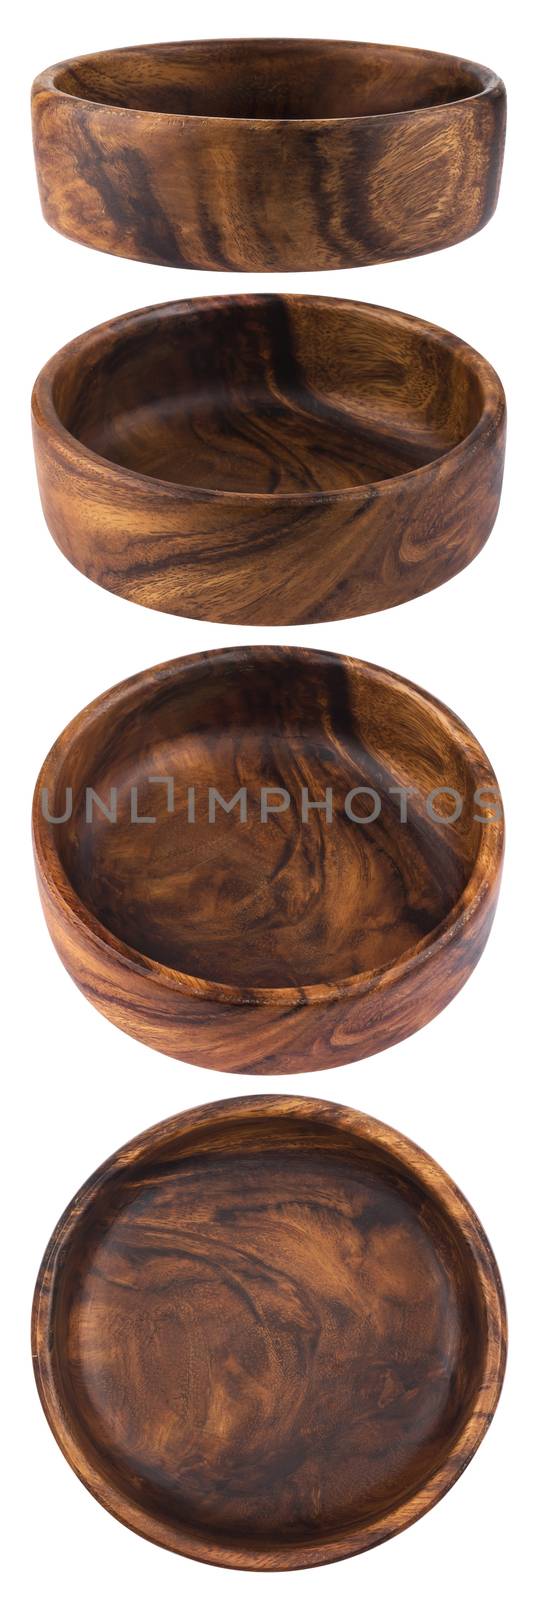 Collection of empty wooden bowls isolated on white background with clipping path.